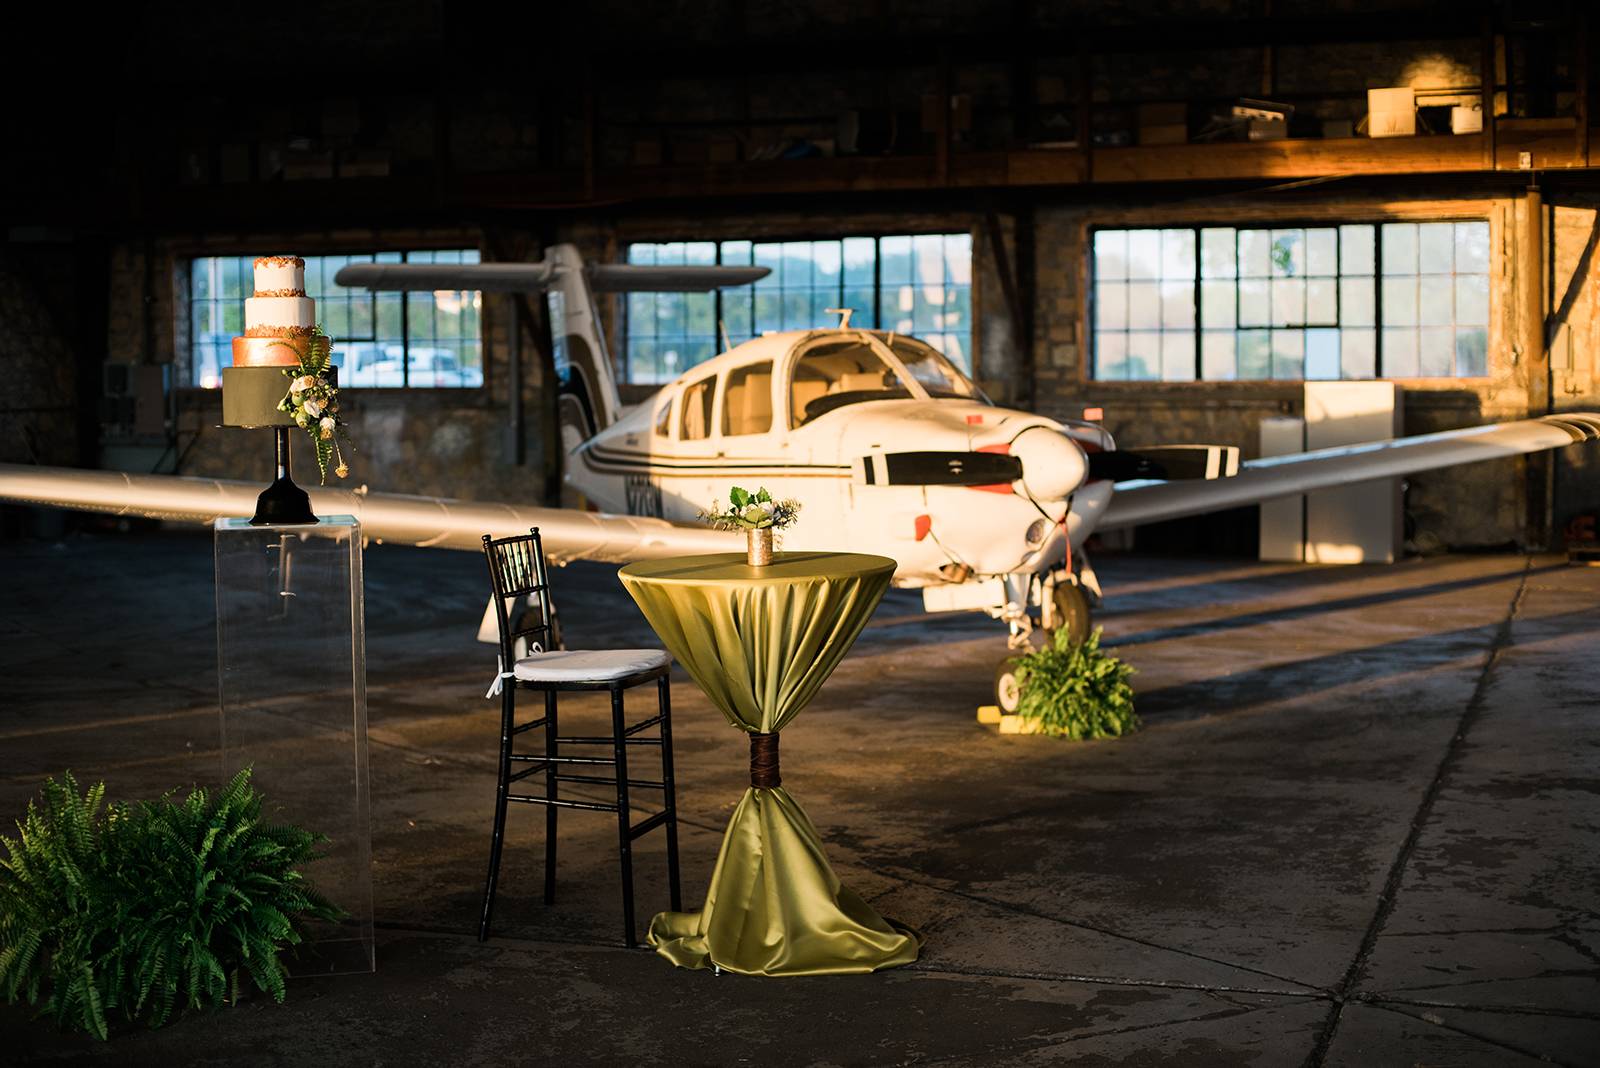 airplane hangar wedding reception venue space, green cocktail tables, cocktail hour, cocktail recept